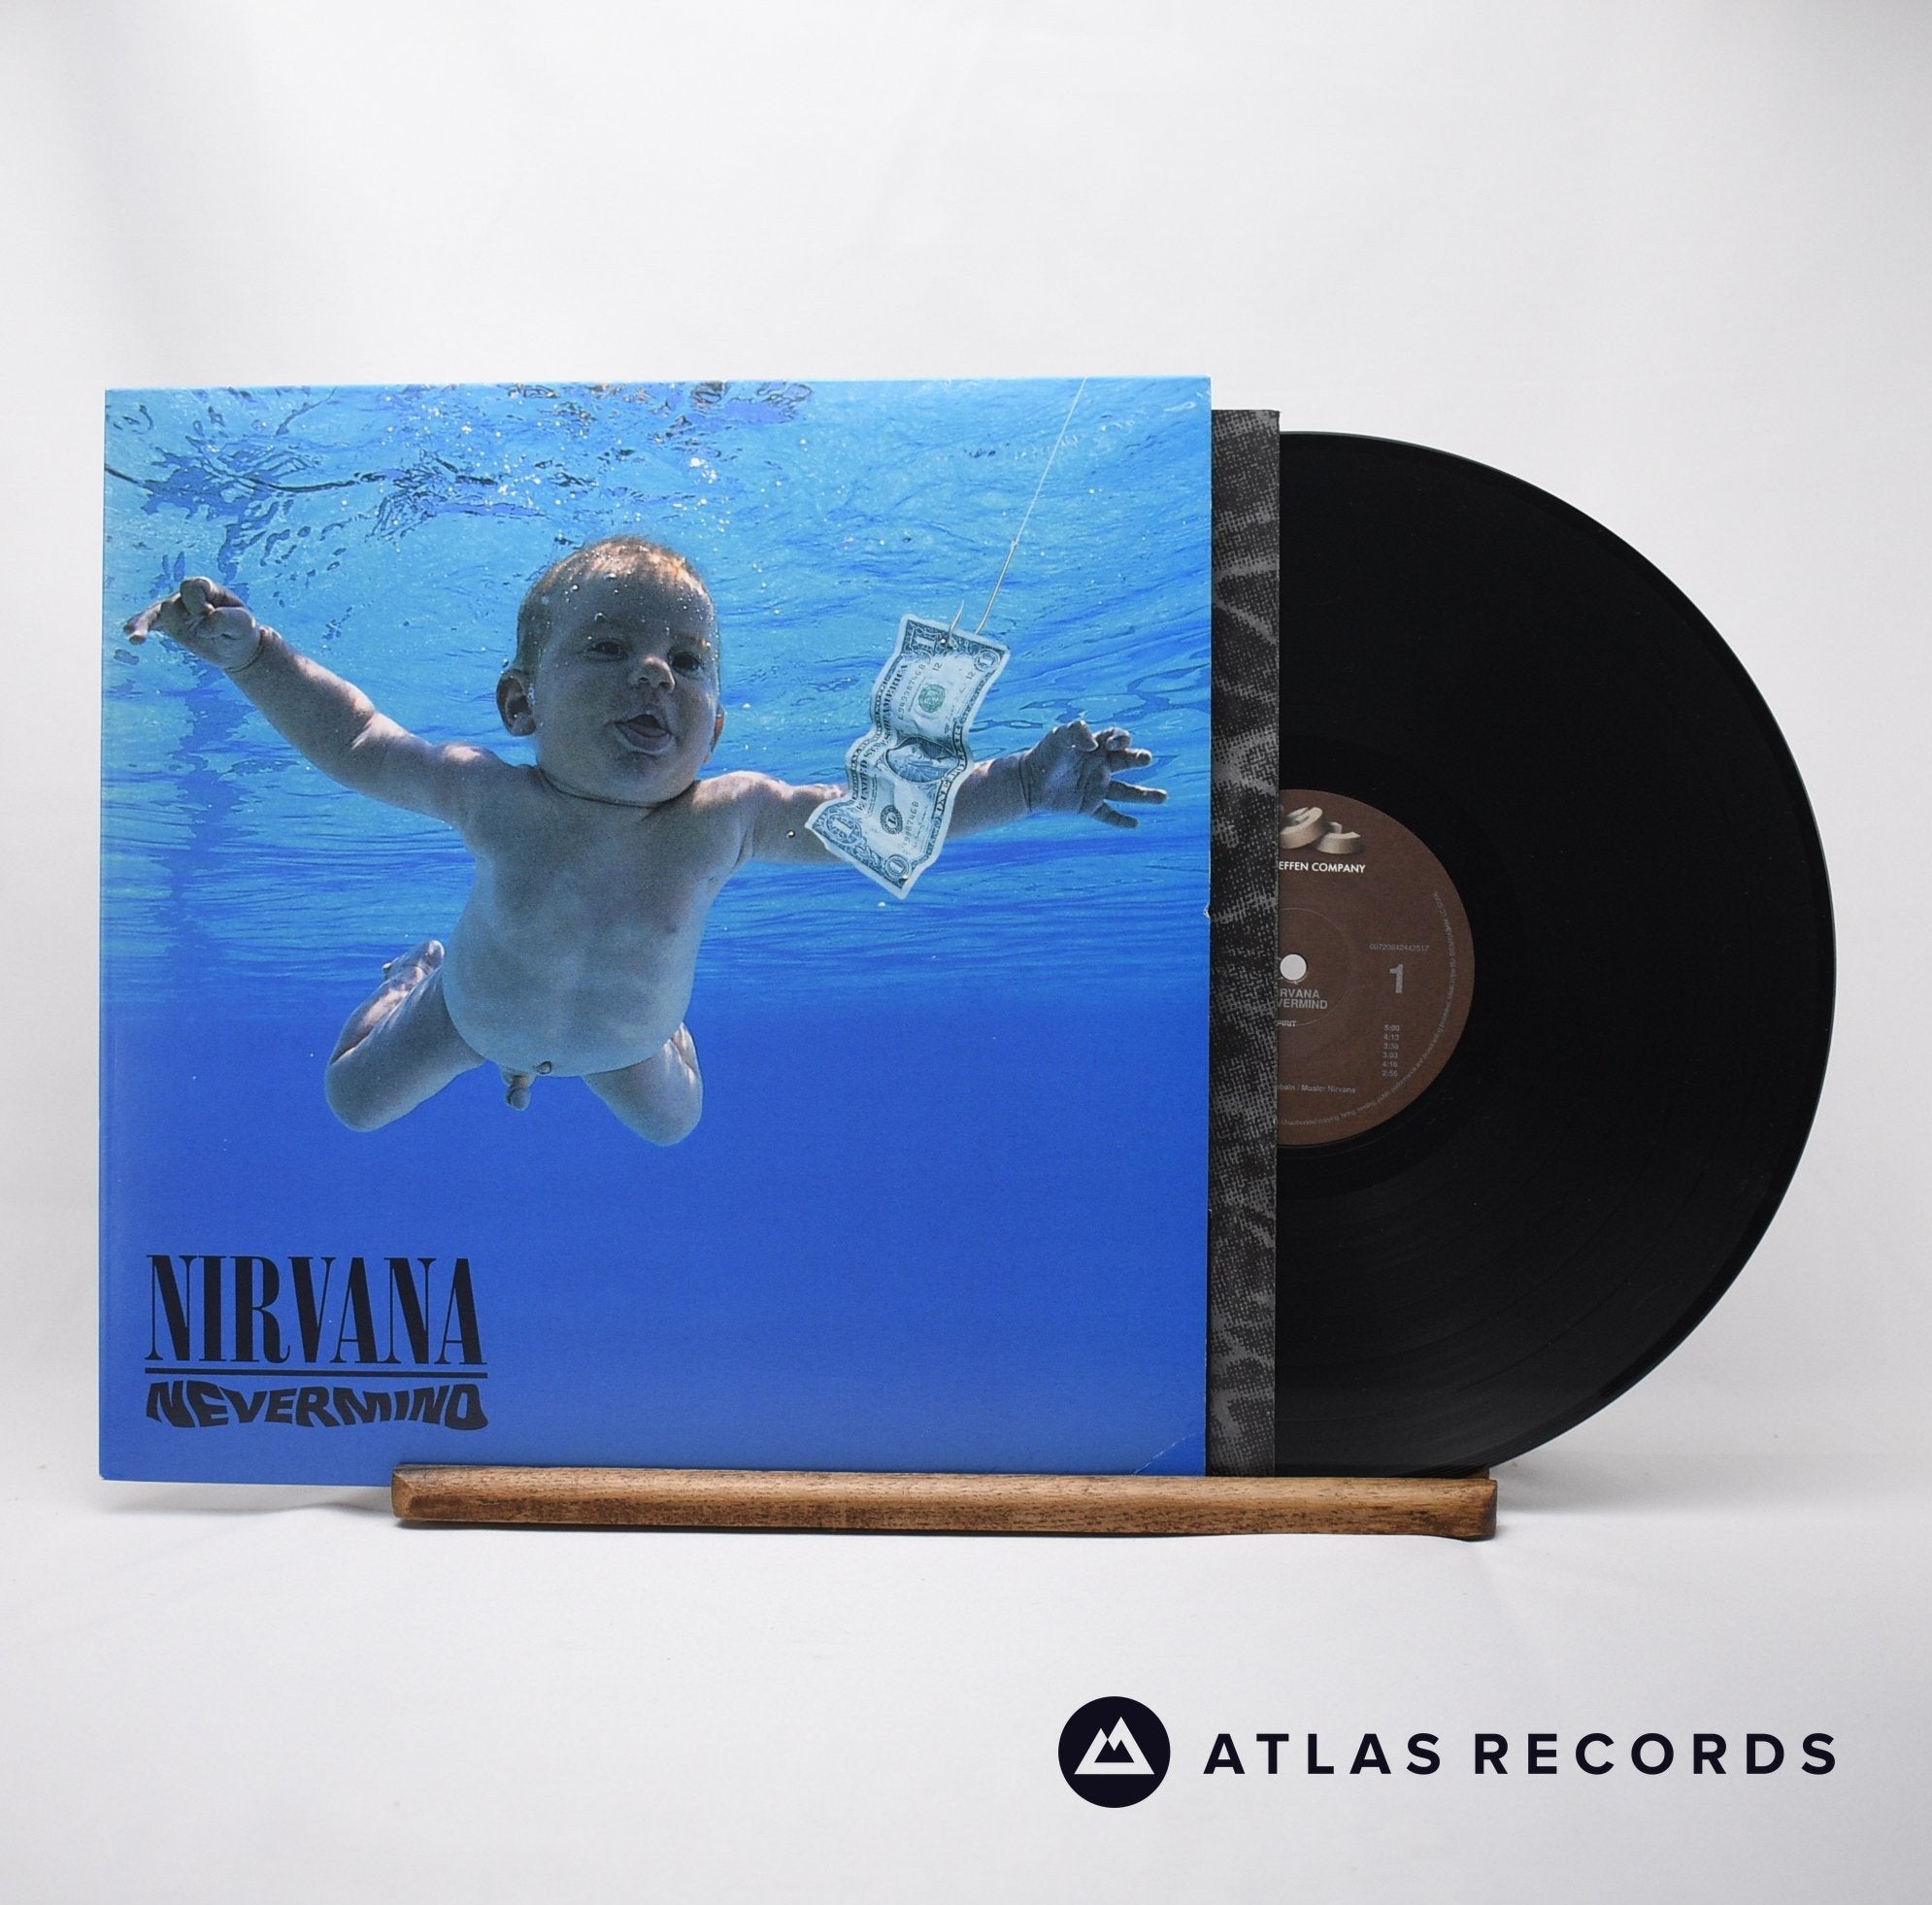 What Are The Best Vinyl Records To Add To Your Collection? ‐ Atlas Records